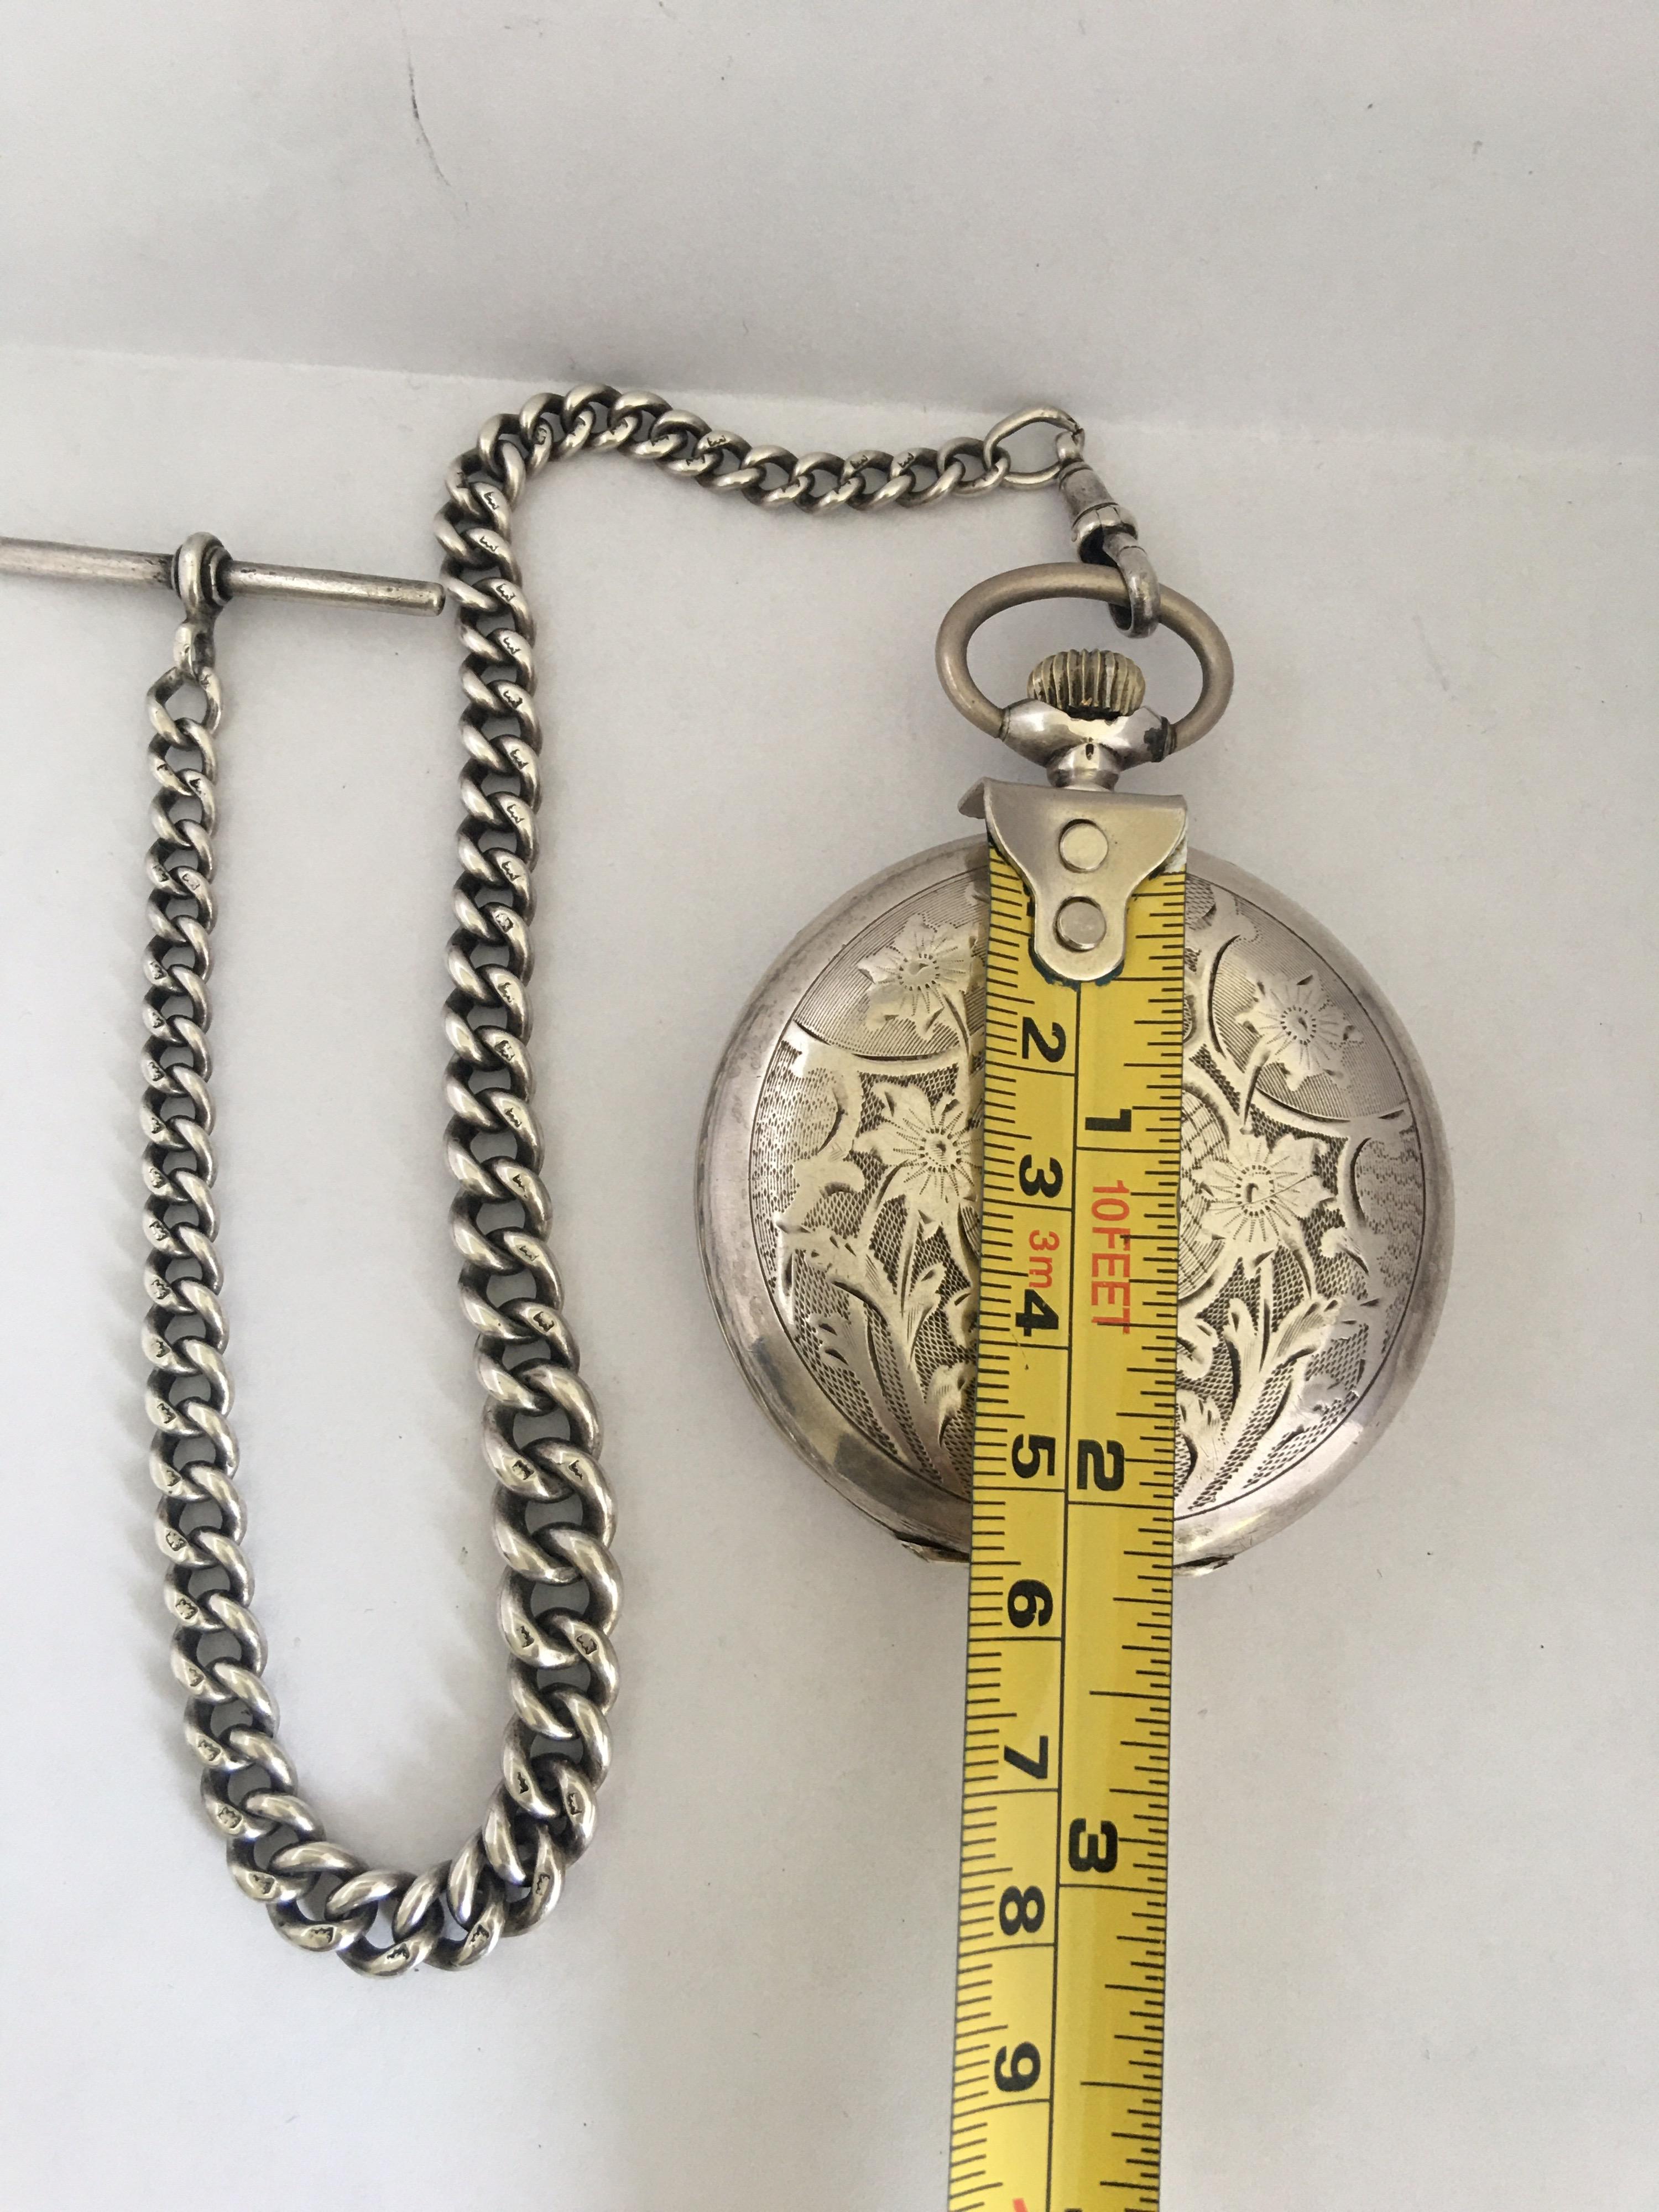 Antique Full Hunter Engraved Silver Pocket Watch Signed Udovic Watch Co. 4